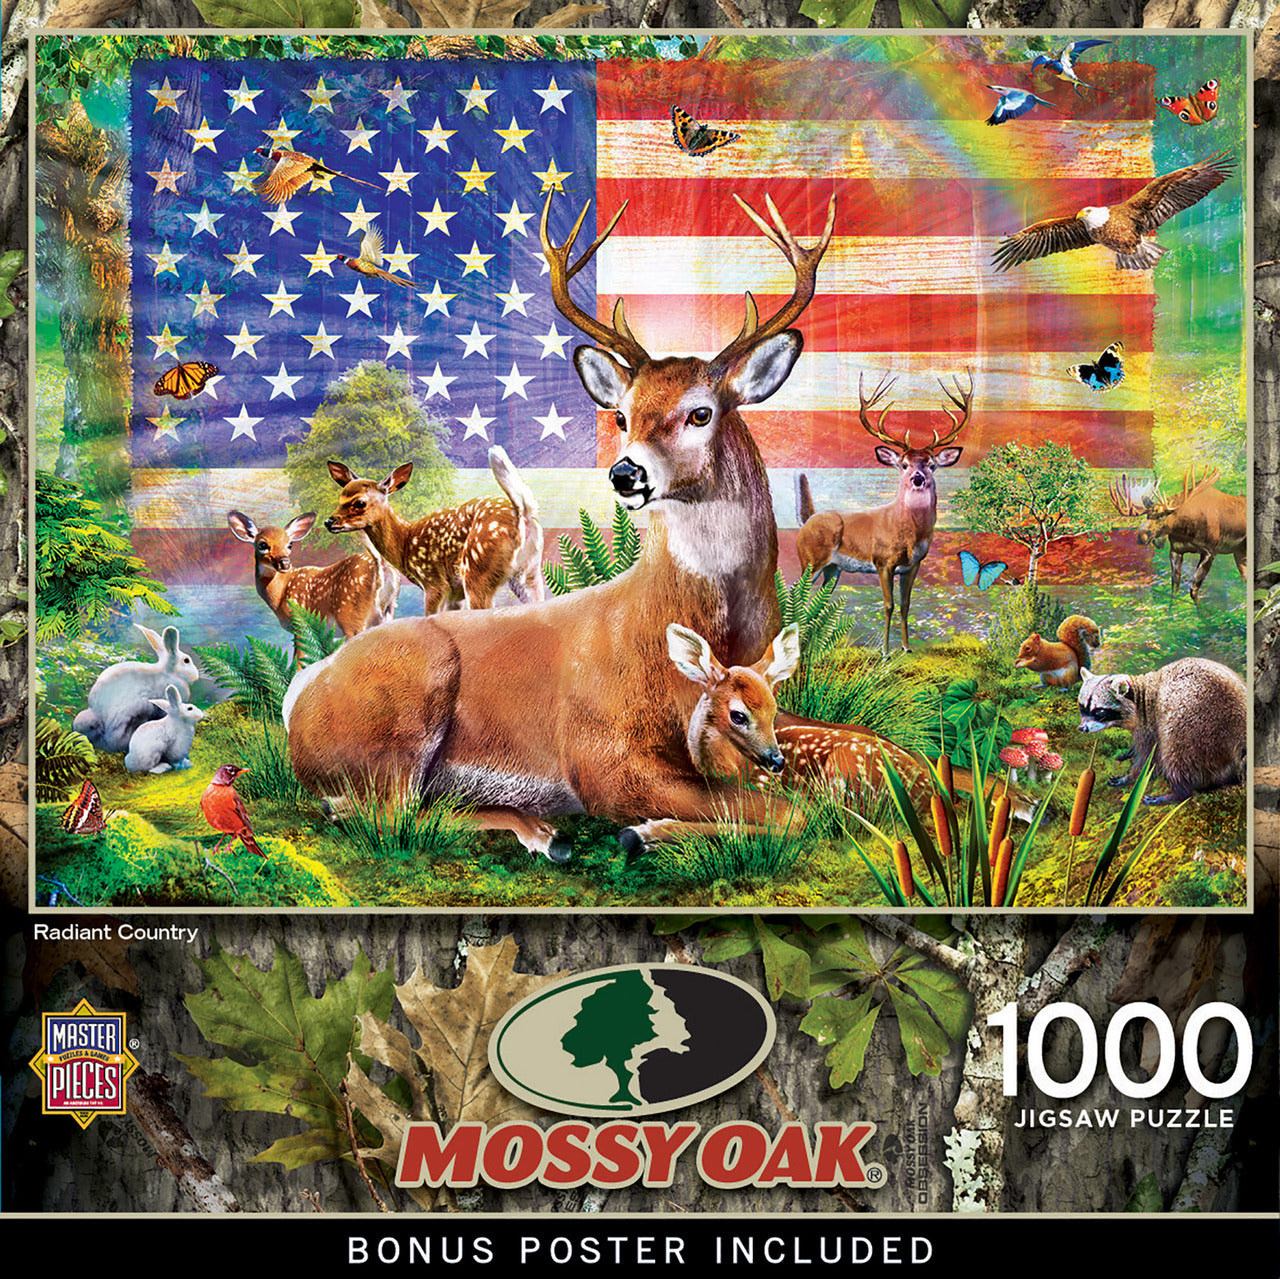 Mossy Oak - Radiant Country 1000 Piece Jigsaw Puzzle by Masterpieces